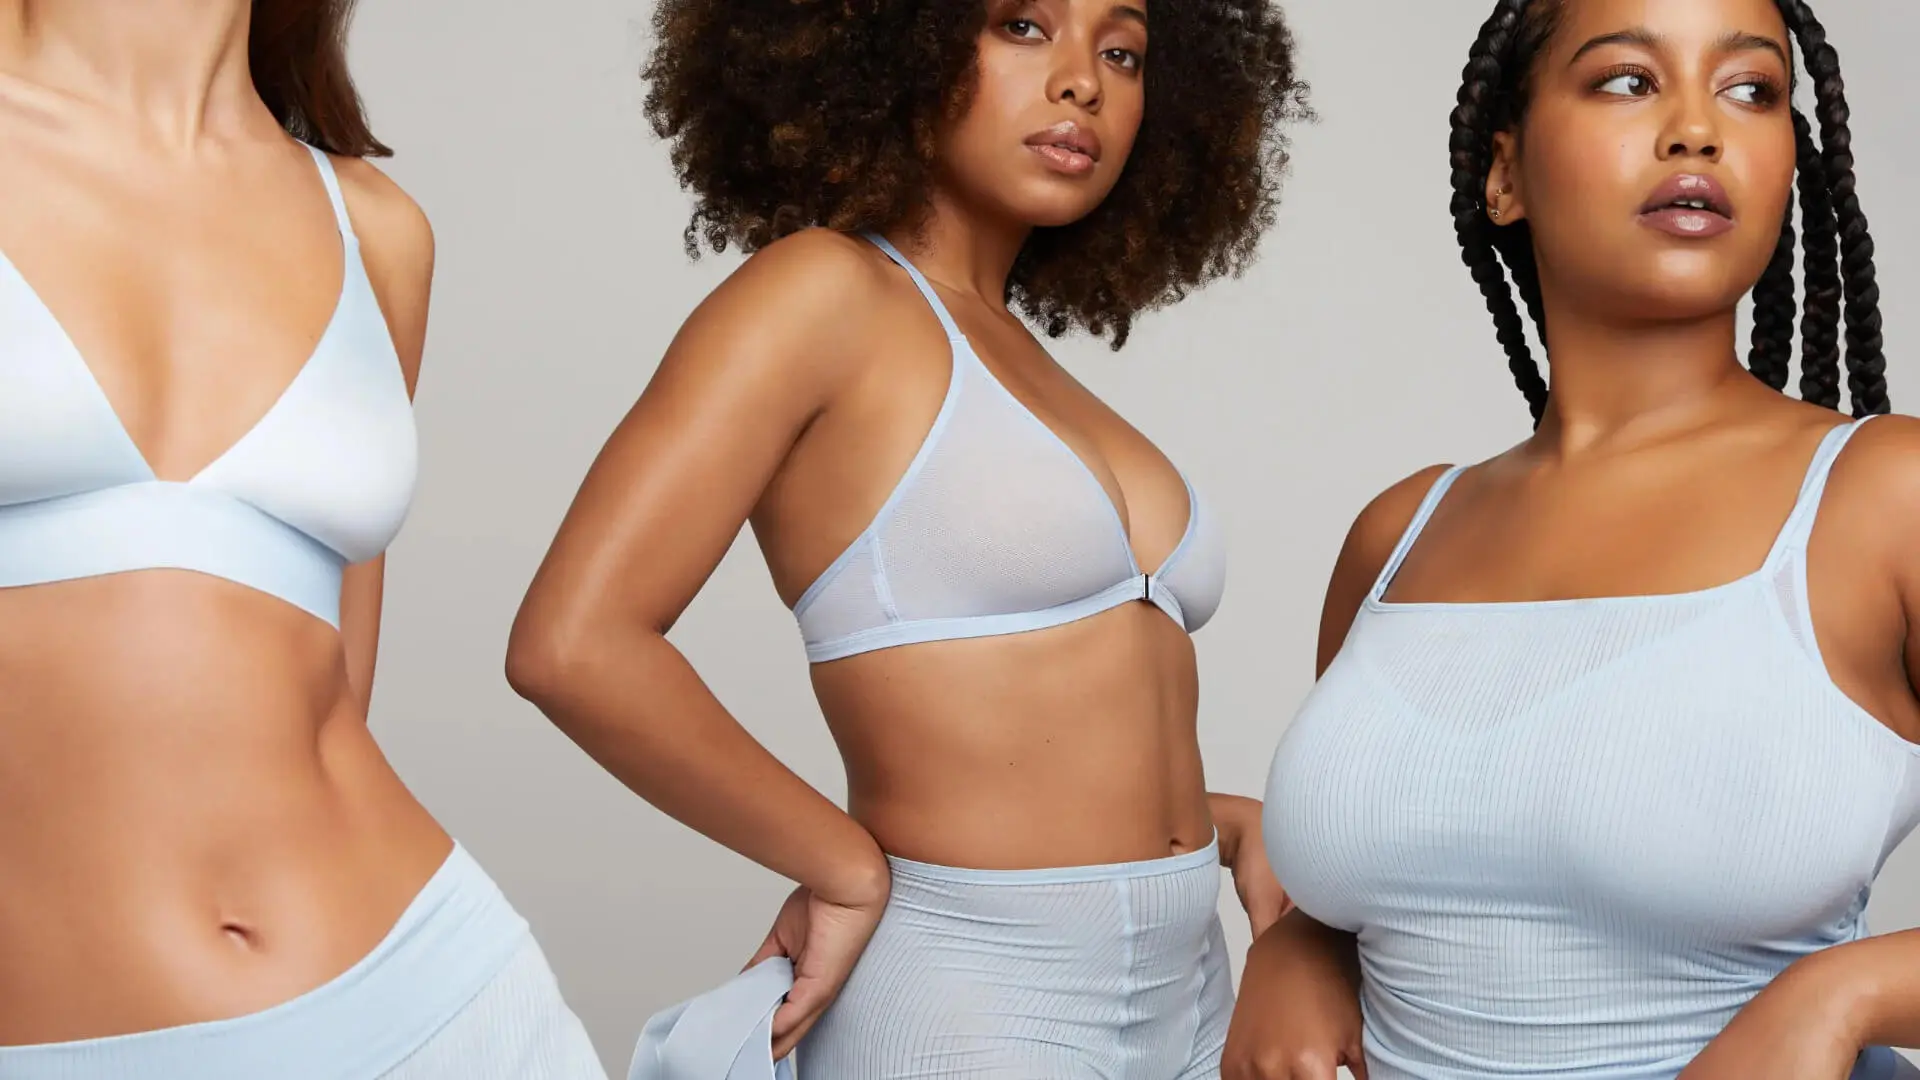 Three women of diverse body types and ethnicities pose confidently in light blue activewear, illustrating body positivity and inclusivity.